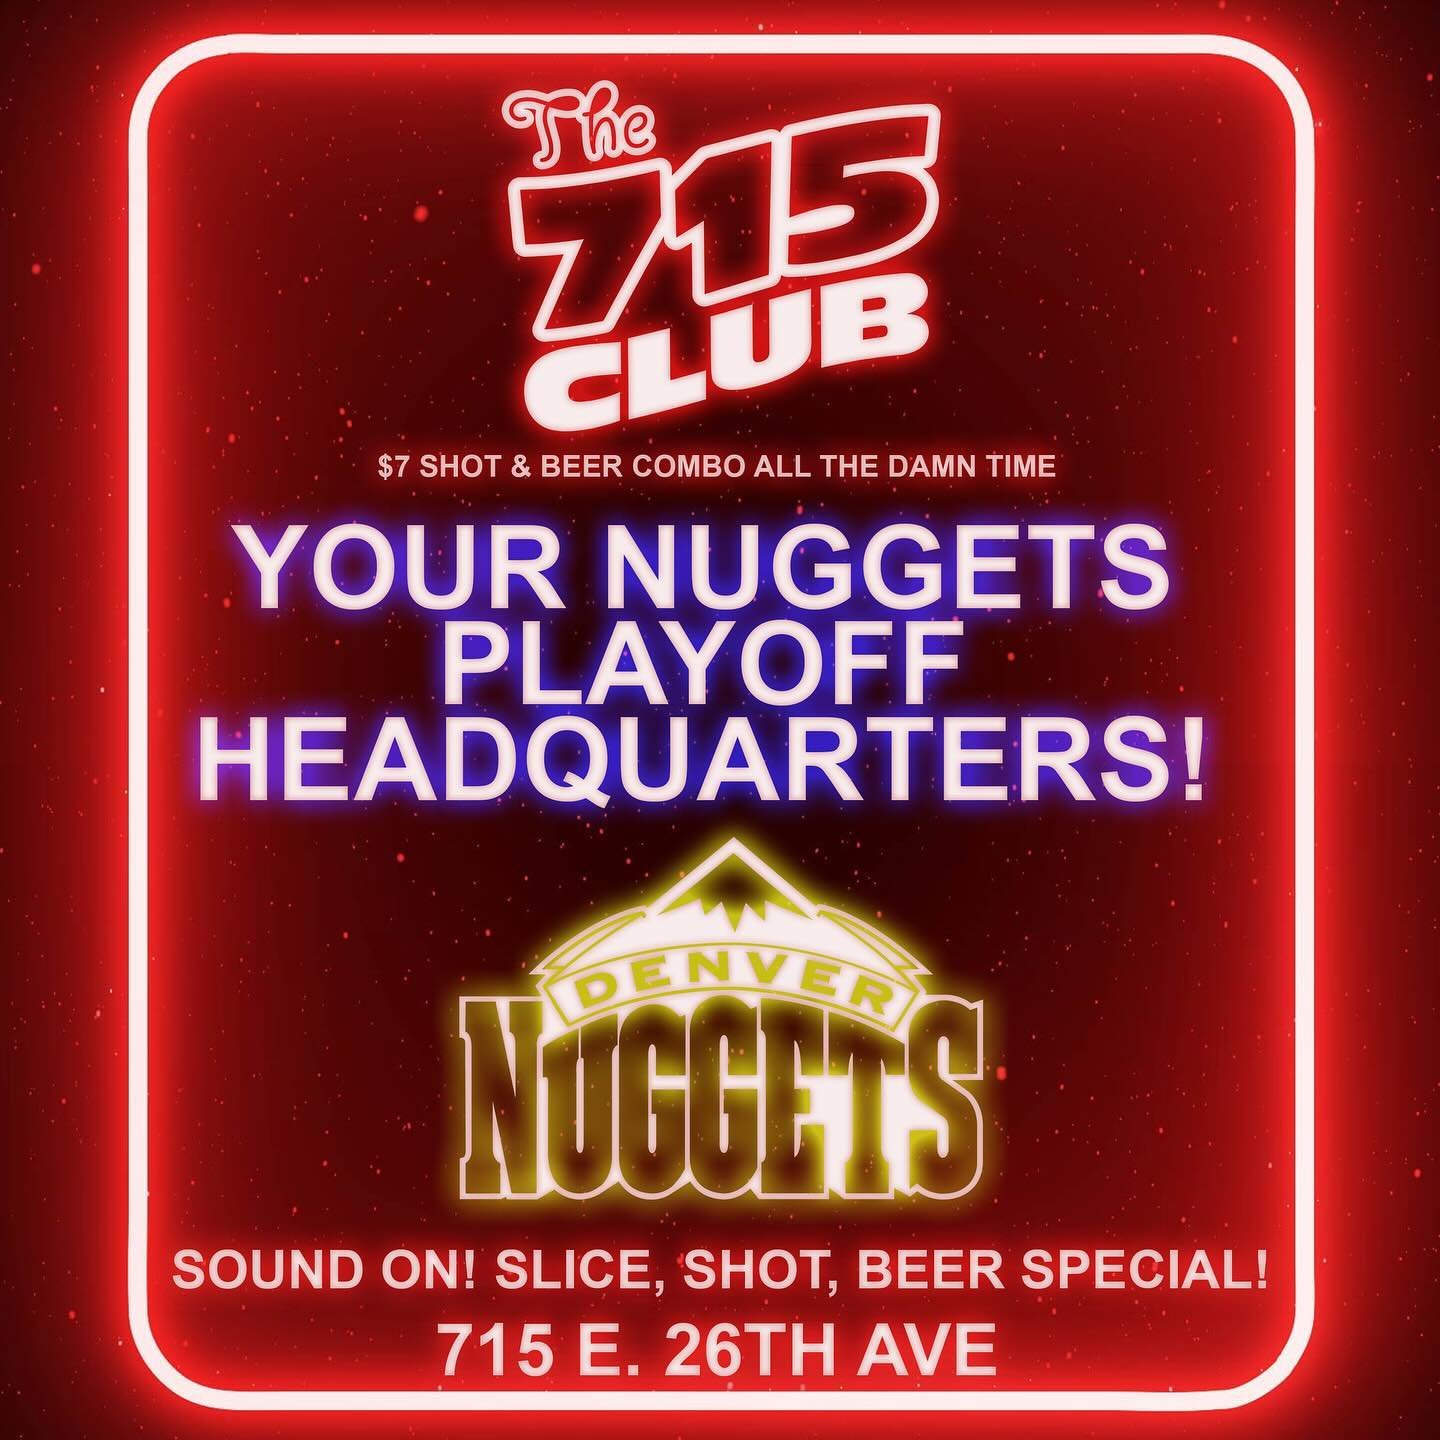 IT&rsquo;S GAME TIME. Throw on your jerseys, paint your chests, tattoo your face and come on down to the bars, have some shots and cheer for the home teams and potential MVPS! Great deals, shots for celebrations and lots of excitement! GO NUGGETS! GO